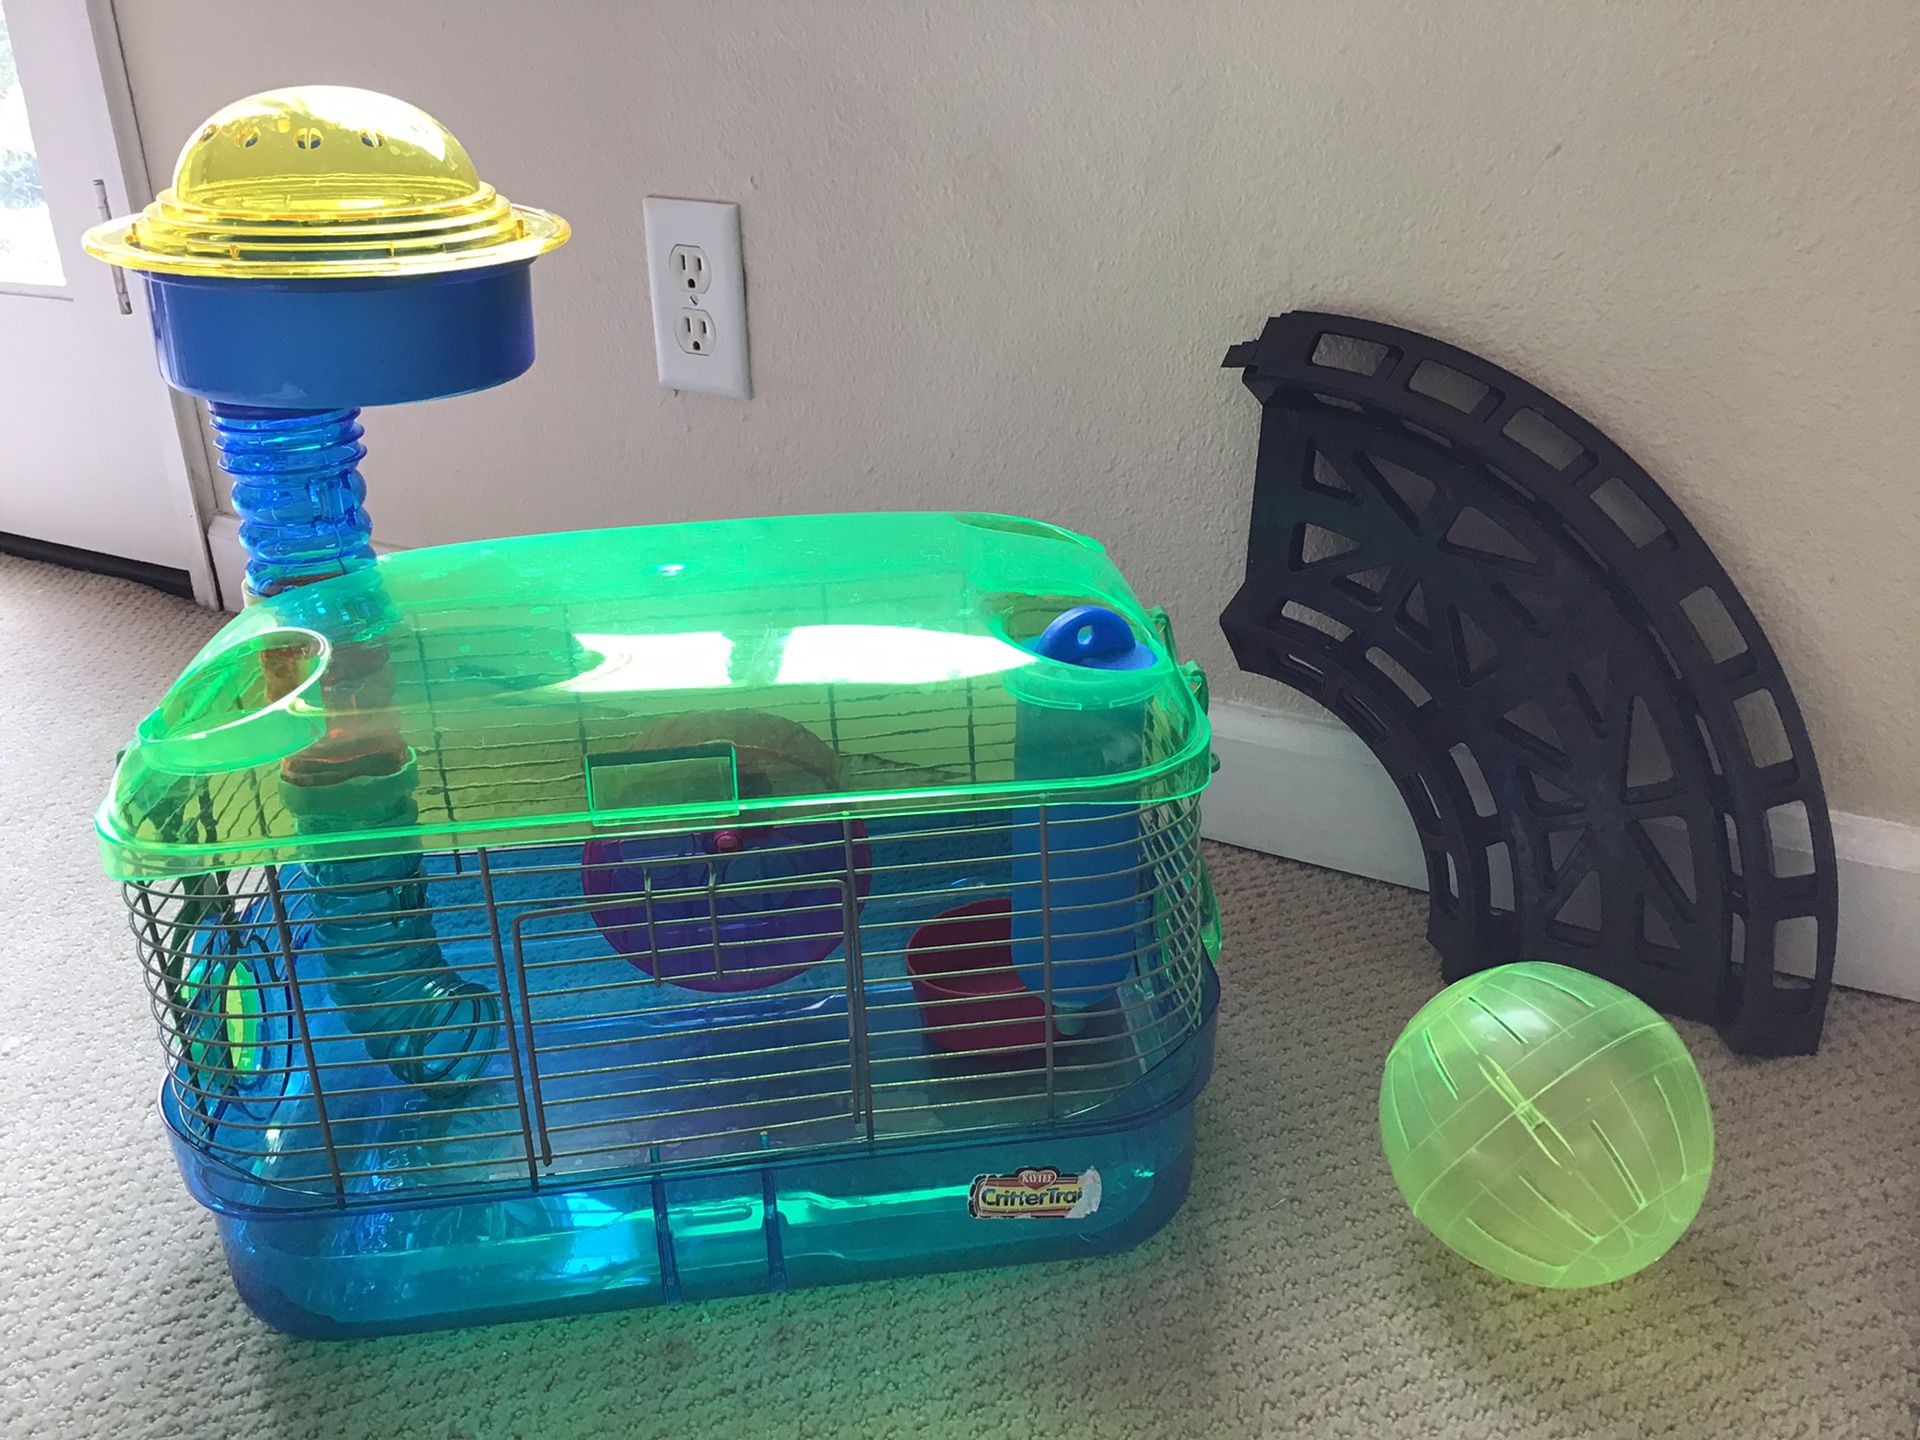 Hamster Cage with wheel, “lookout”, rolly ball, ball track, and bedding.